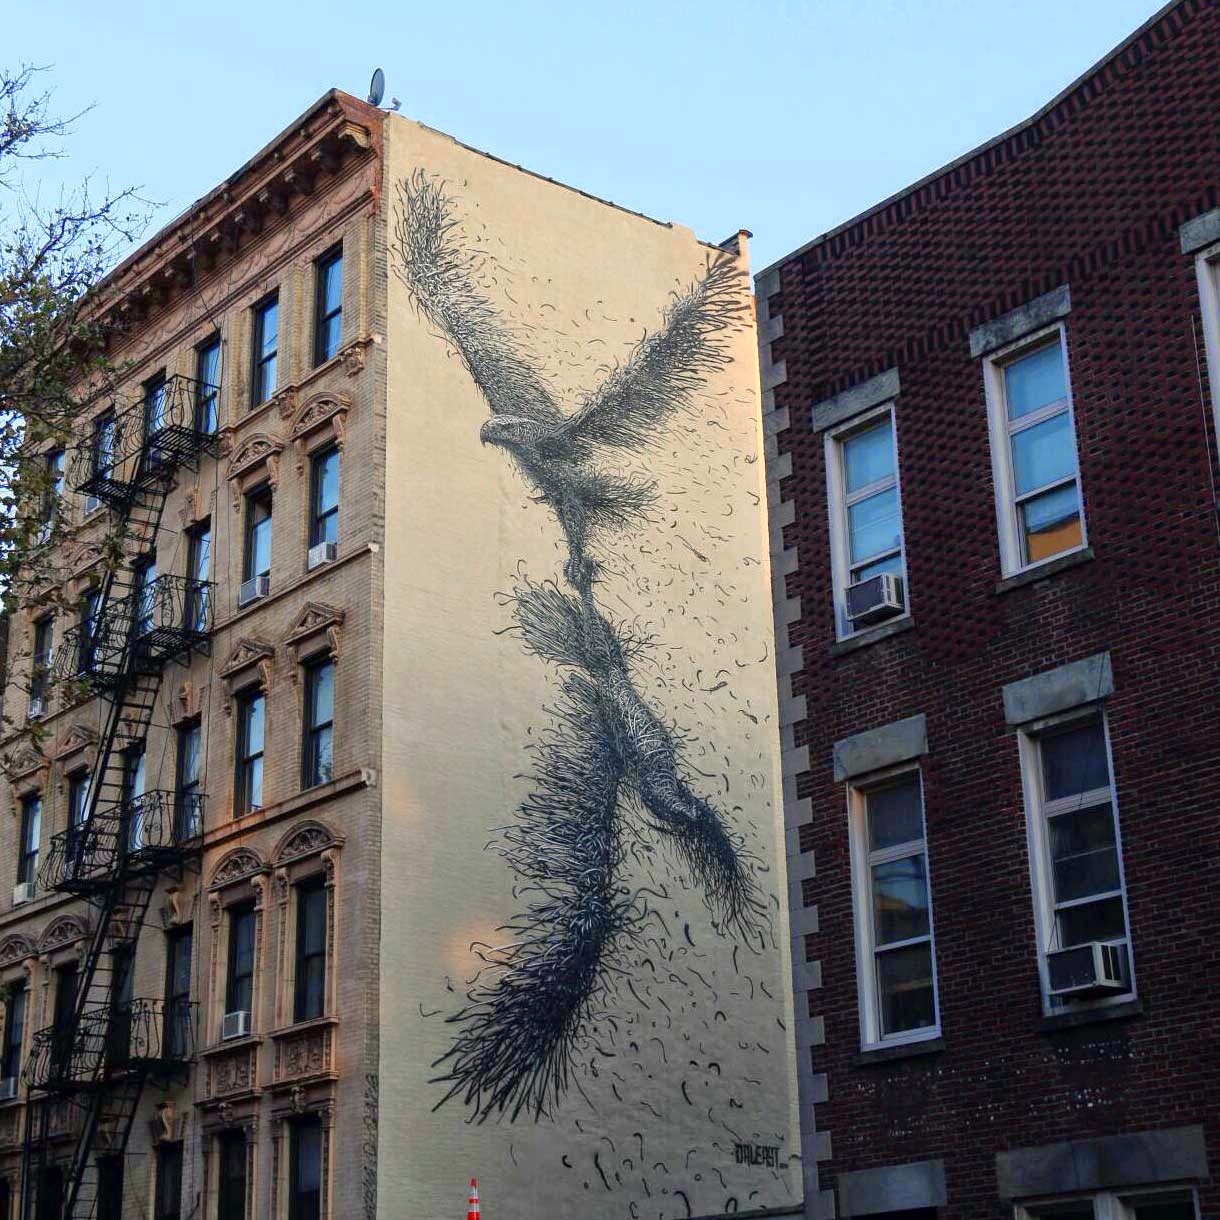 The Chinese painter DALeast is currently in New York City where he just finished working on this new mural in Manhattan.